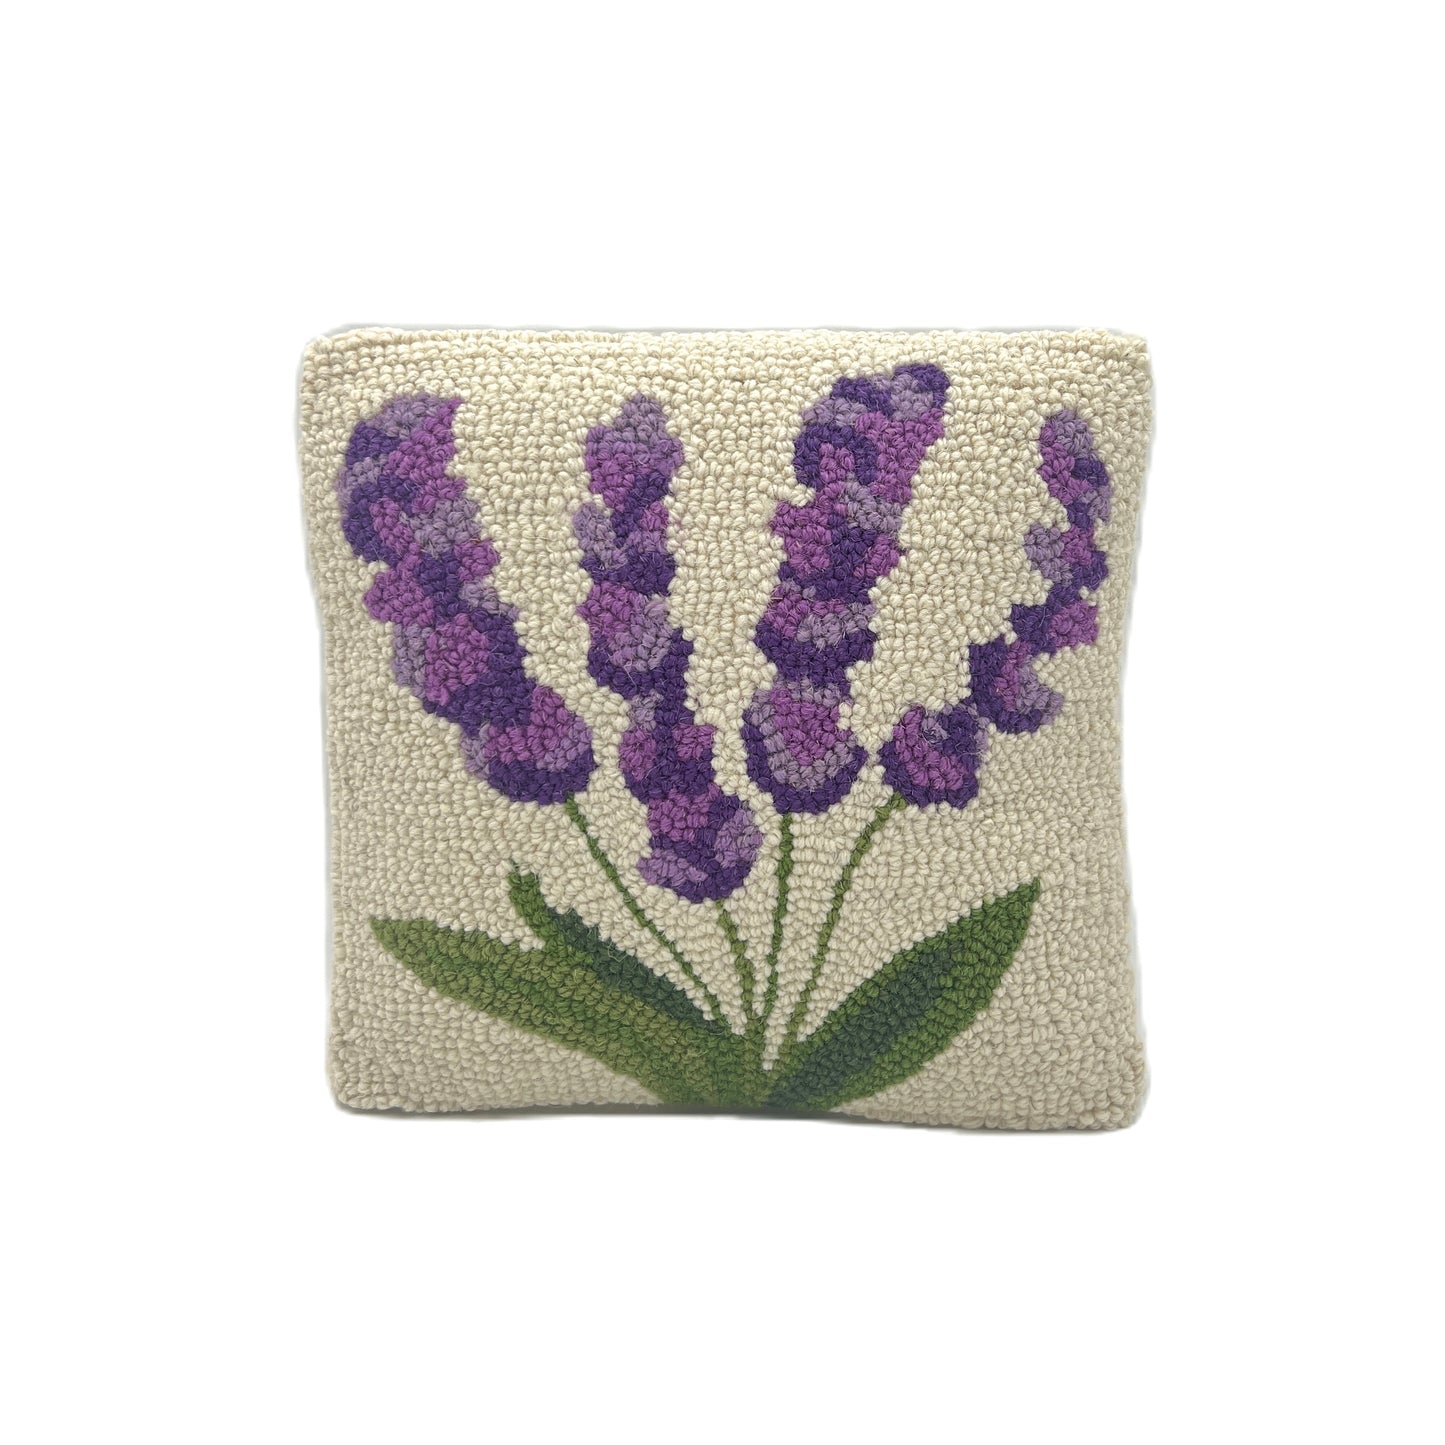 Lavender Bouquet Wool Hooked Pillow Pillow 1818 Farms   